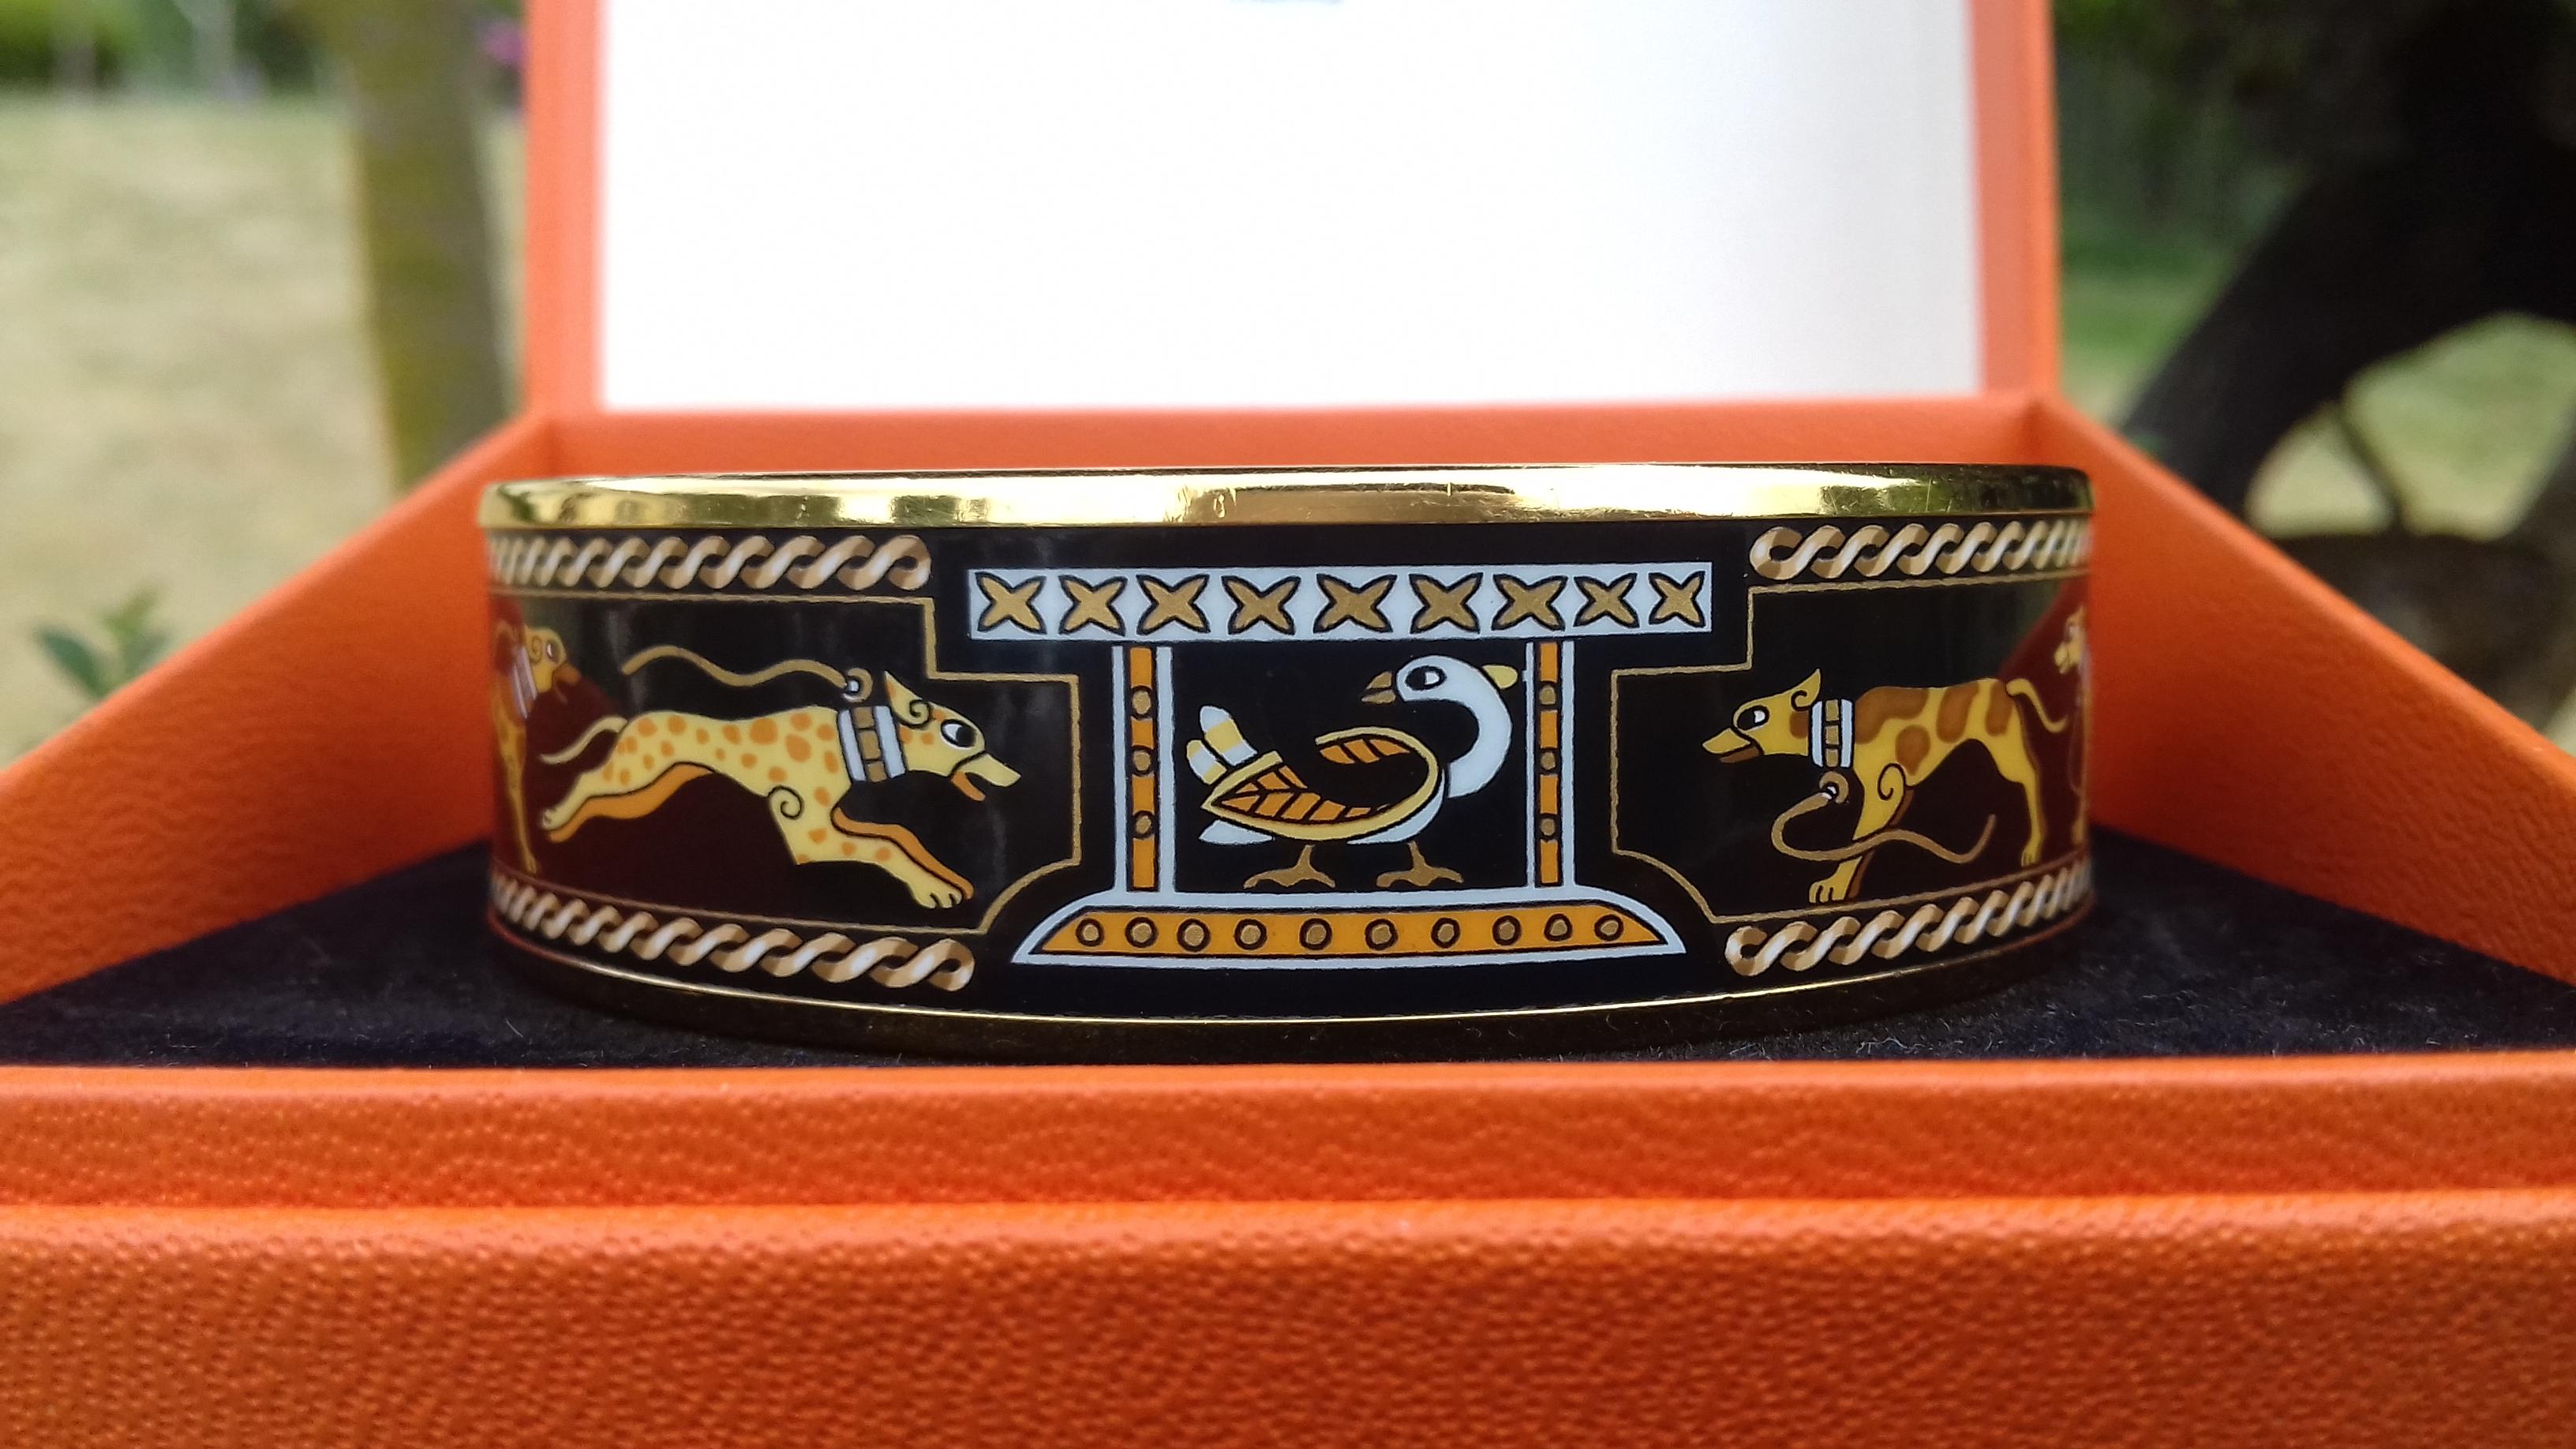 Beautiful Authentic Hermès Bracelet

Pattern: Lévriers (Greyhound dogs)

Hard to find ! 

Made in Austria + B (1998)

Made of Enamel and Gold plated Hardware

Colorways: Black, Yellow, Brown

The leashes and the interlacing decoration are in golden,